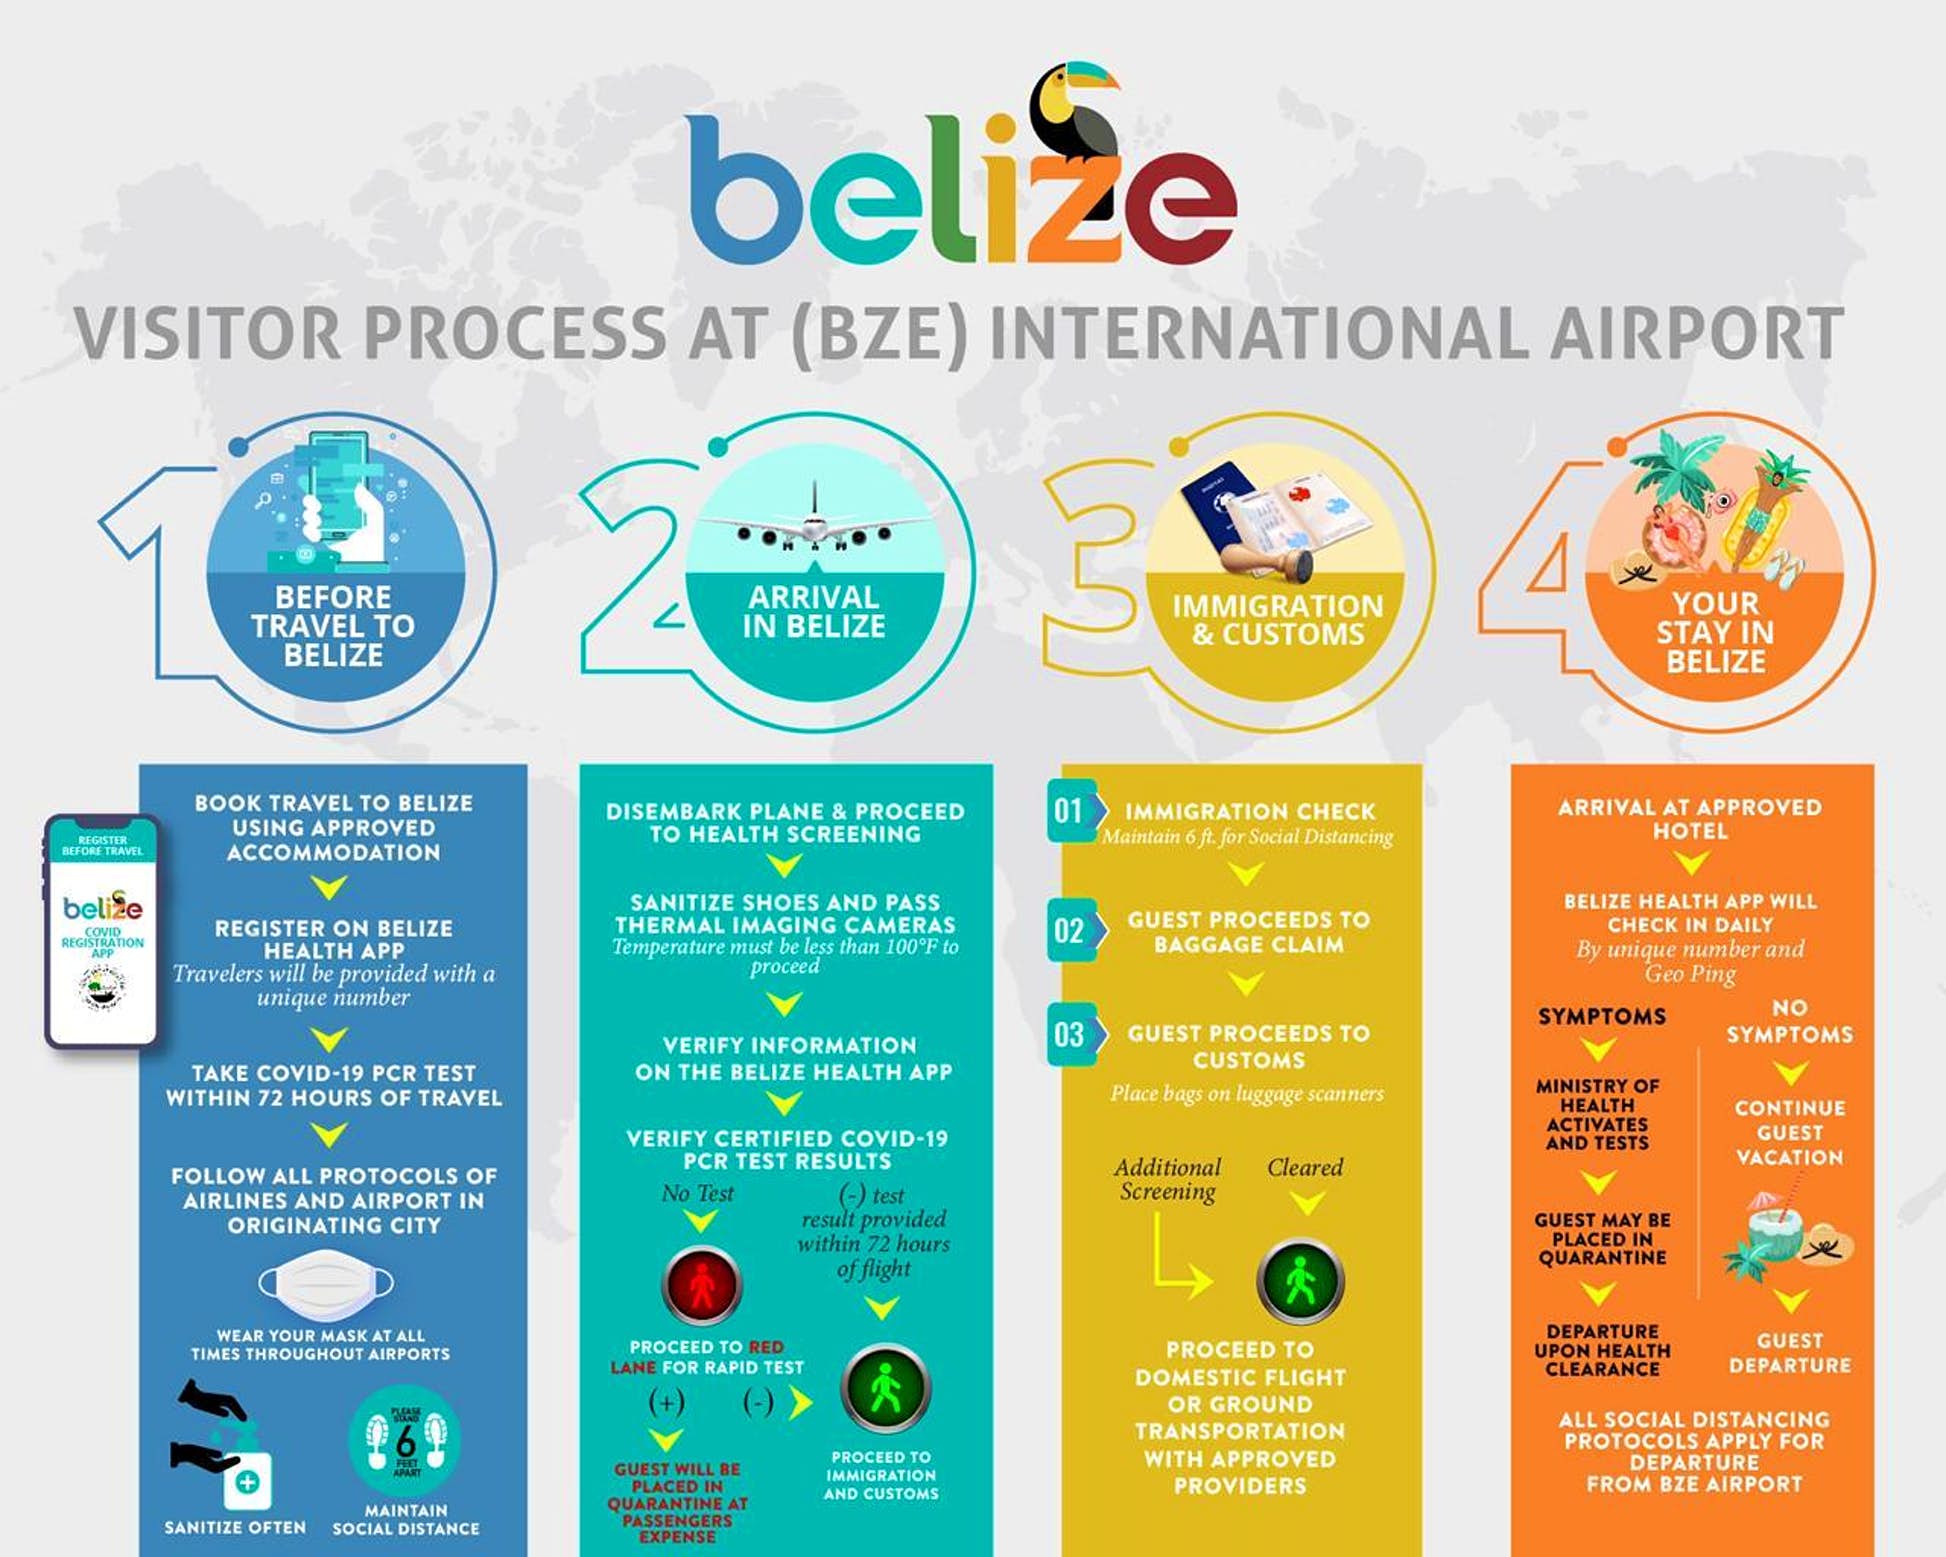 Protocols for COVID-19 in Belize © Courtesy of the Government of Belize Press Office